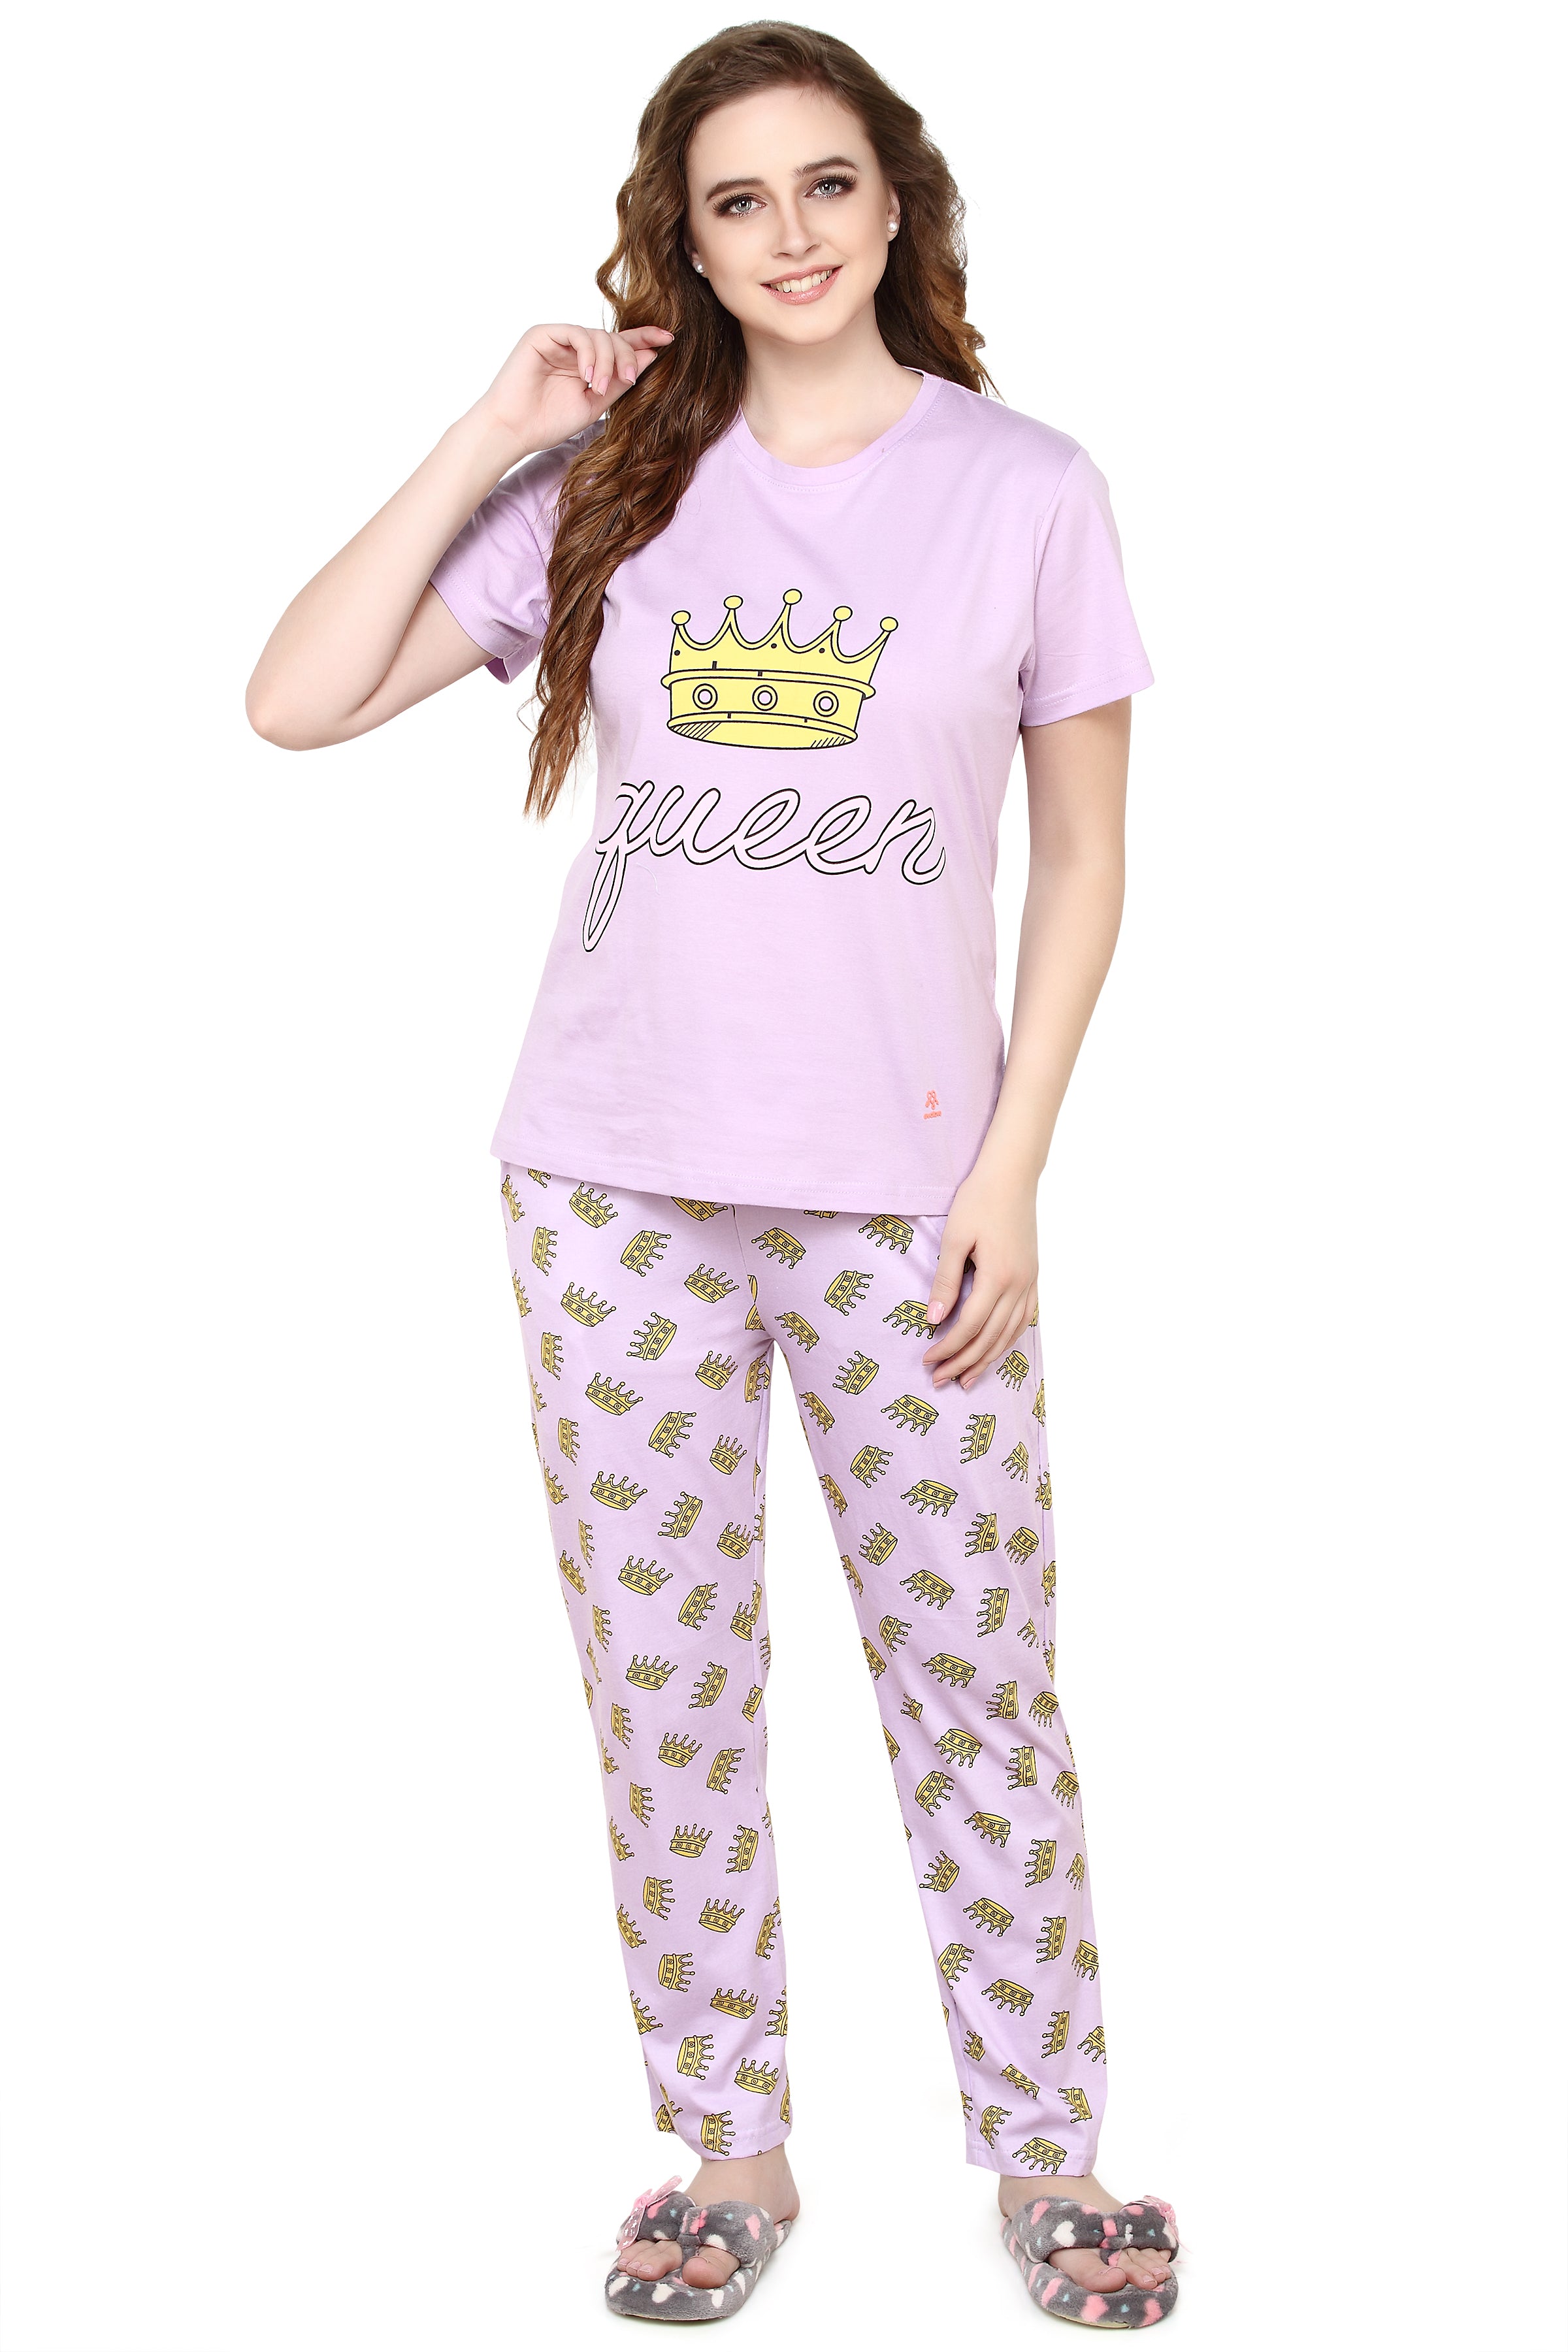 evolove Lilac Sachet Round Neck Crown & Queen print Women's (Pajama set), (Lavender), M Get free eyemask inside of any design